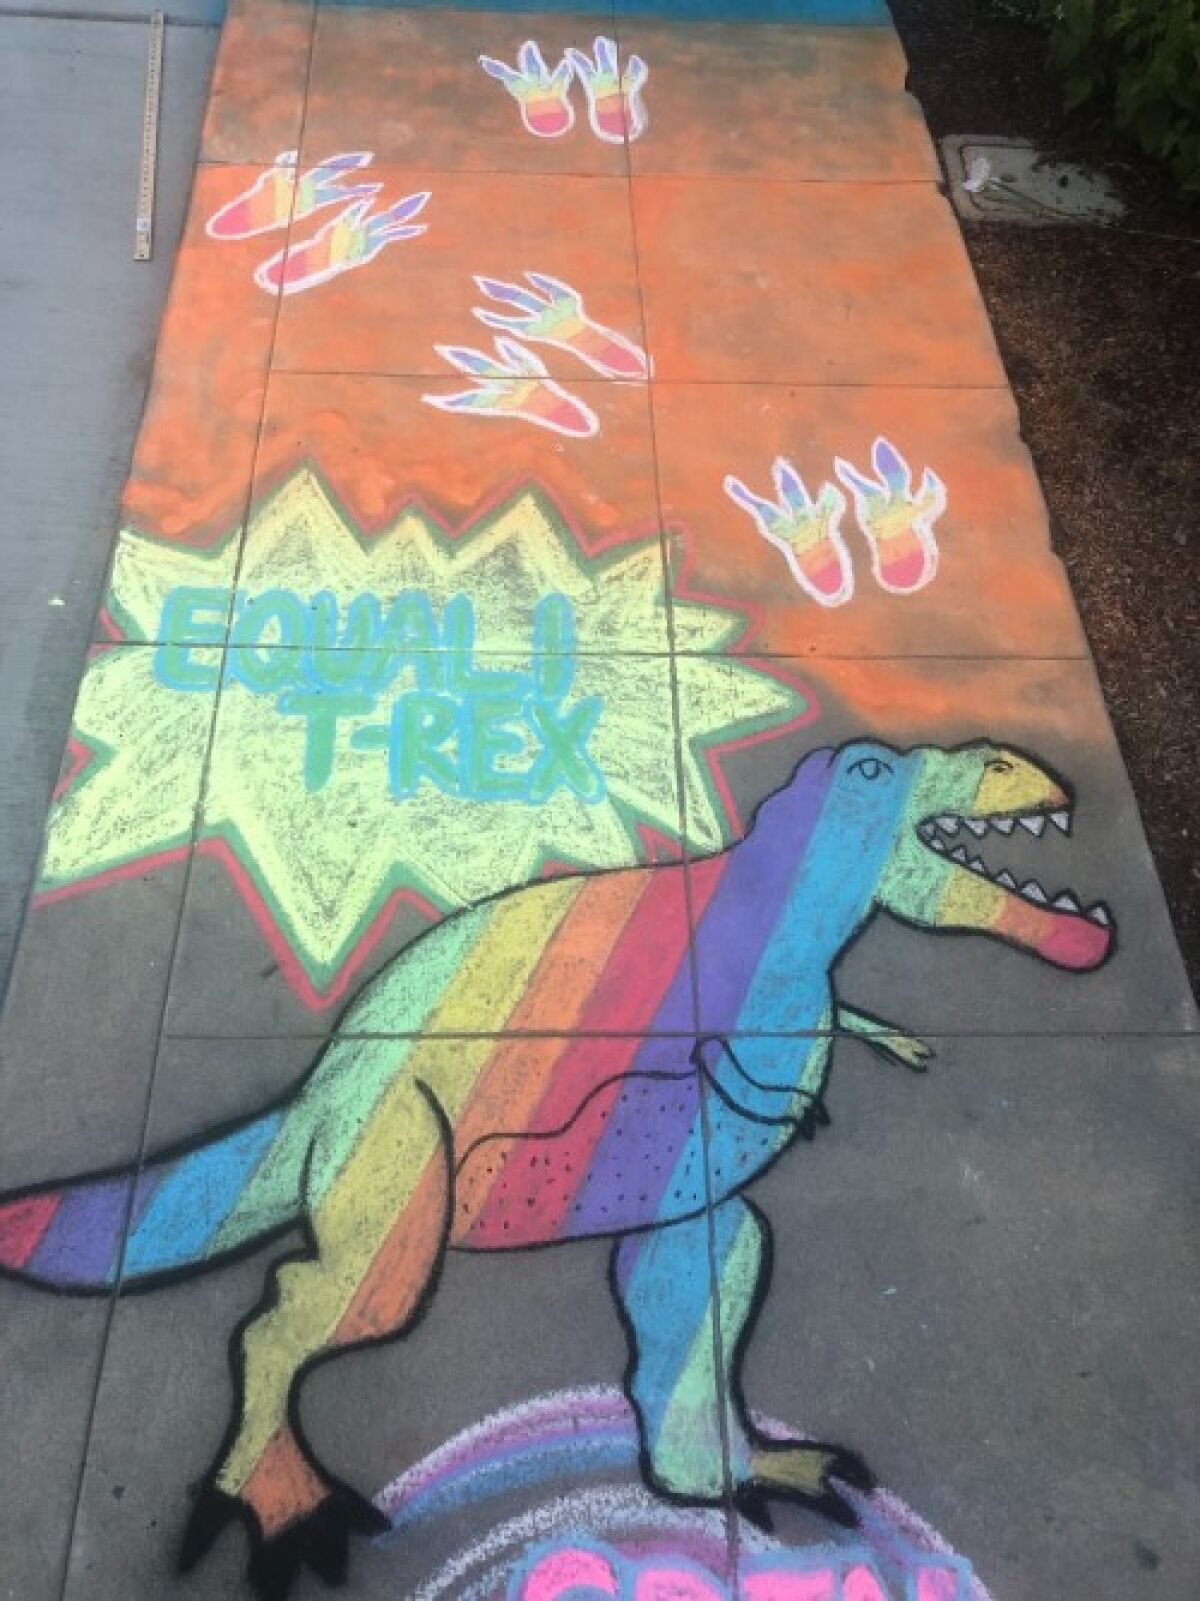 Amelia Leidy's sidewalk chalk projects for June include LGBTQ Pride themes featuring rainbows and this Equali-T-rex.